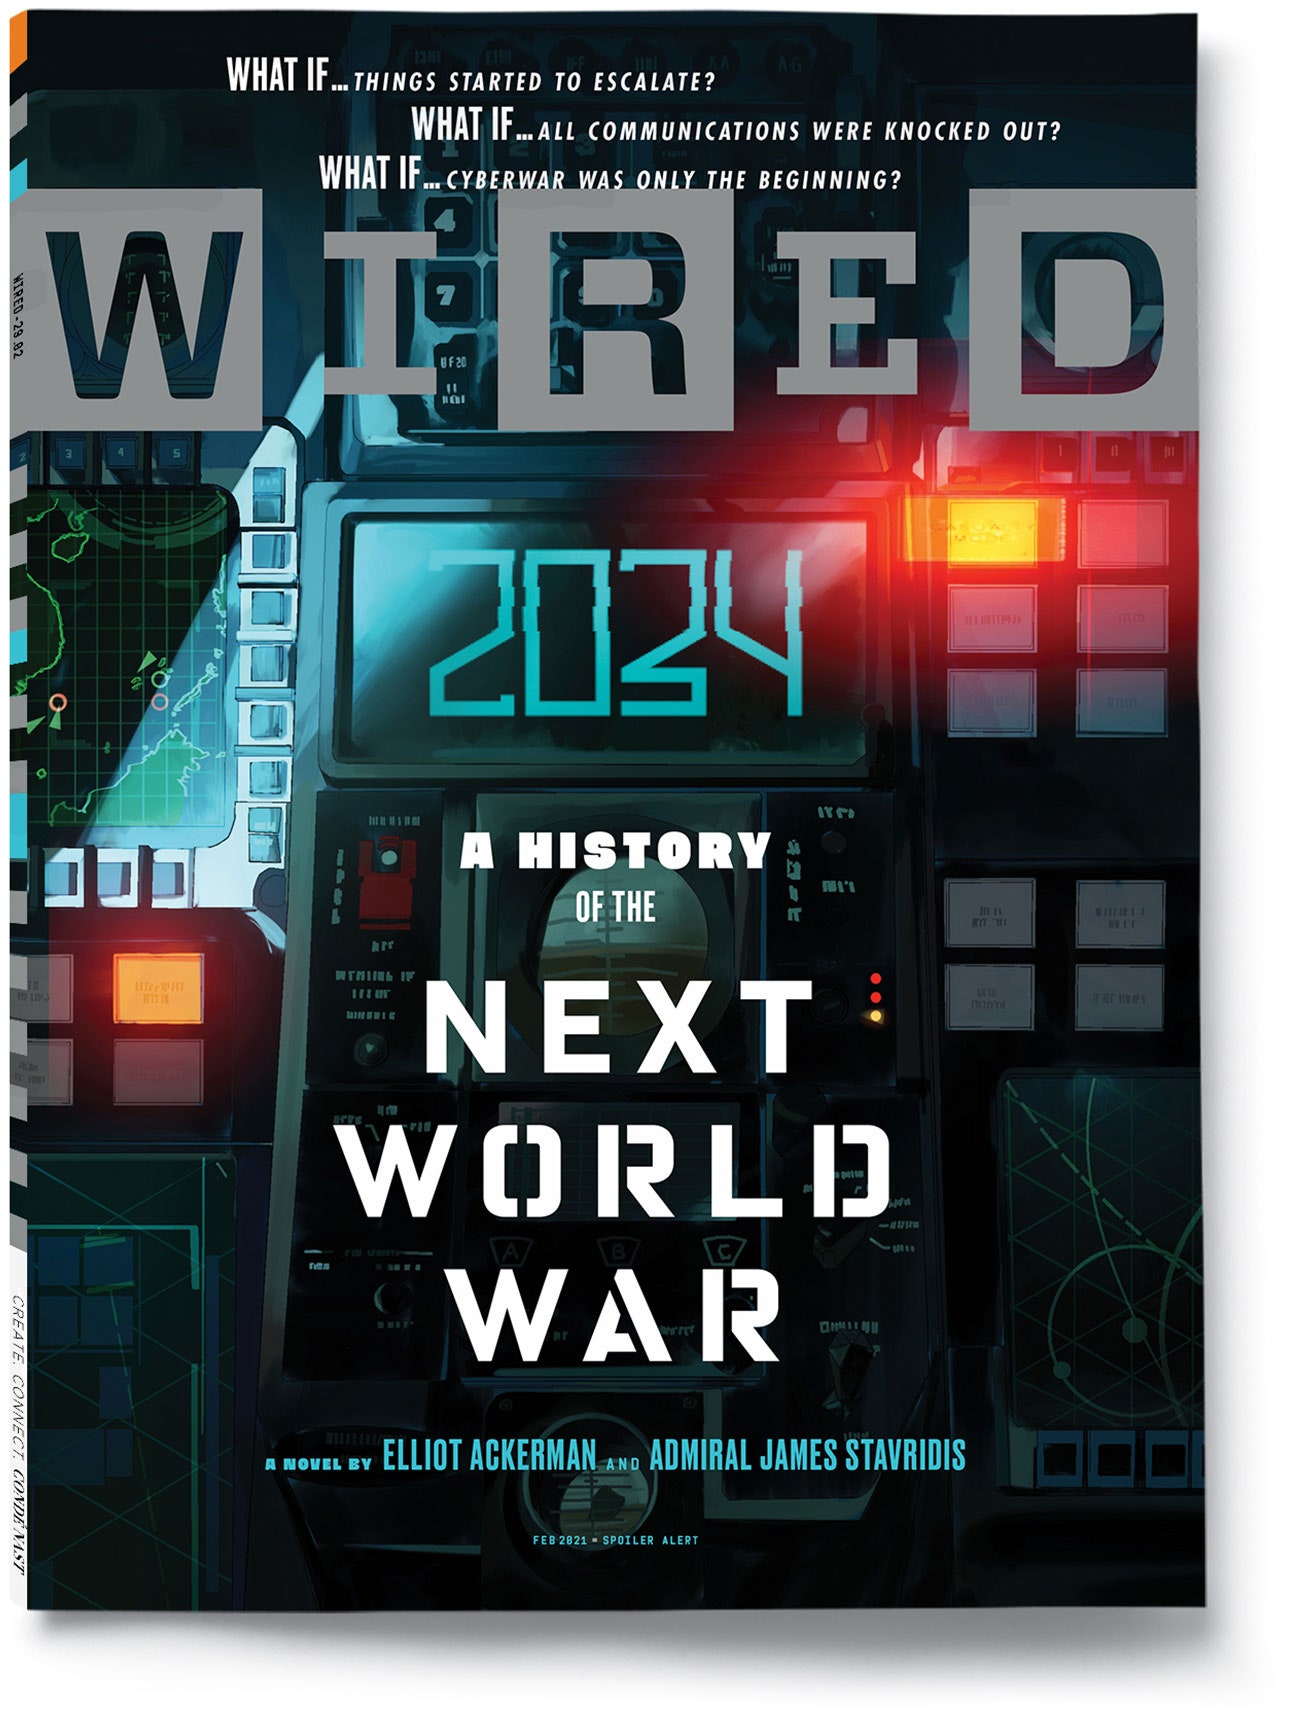 book review of 2034